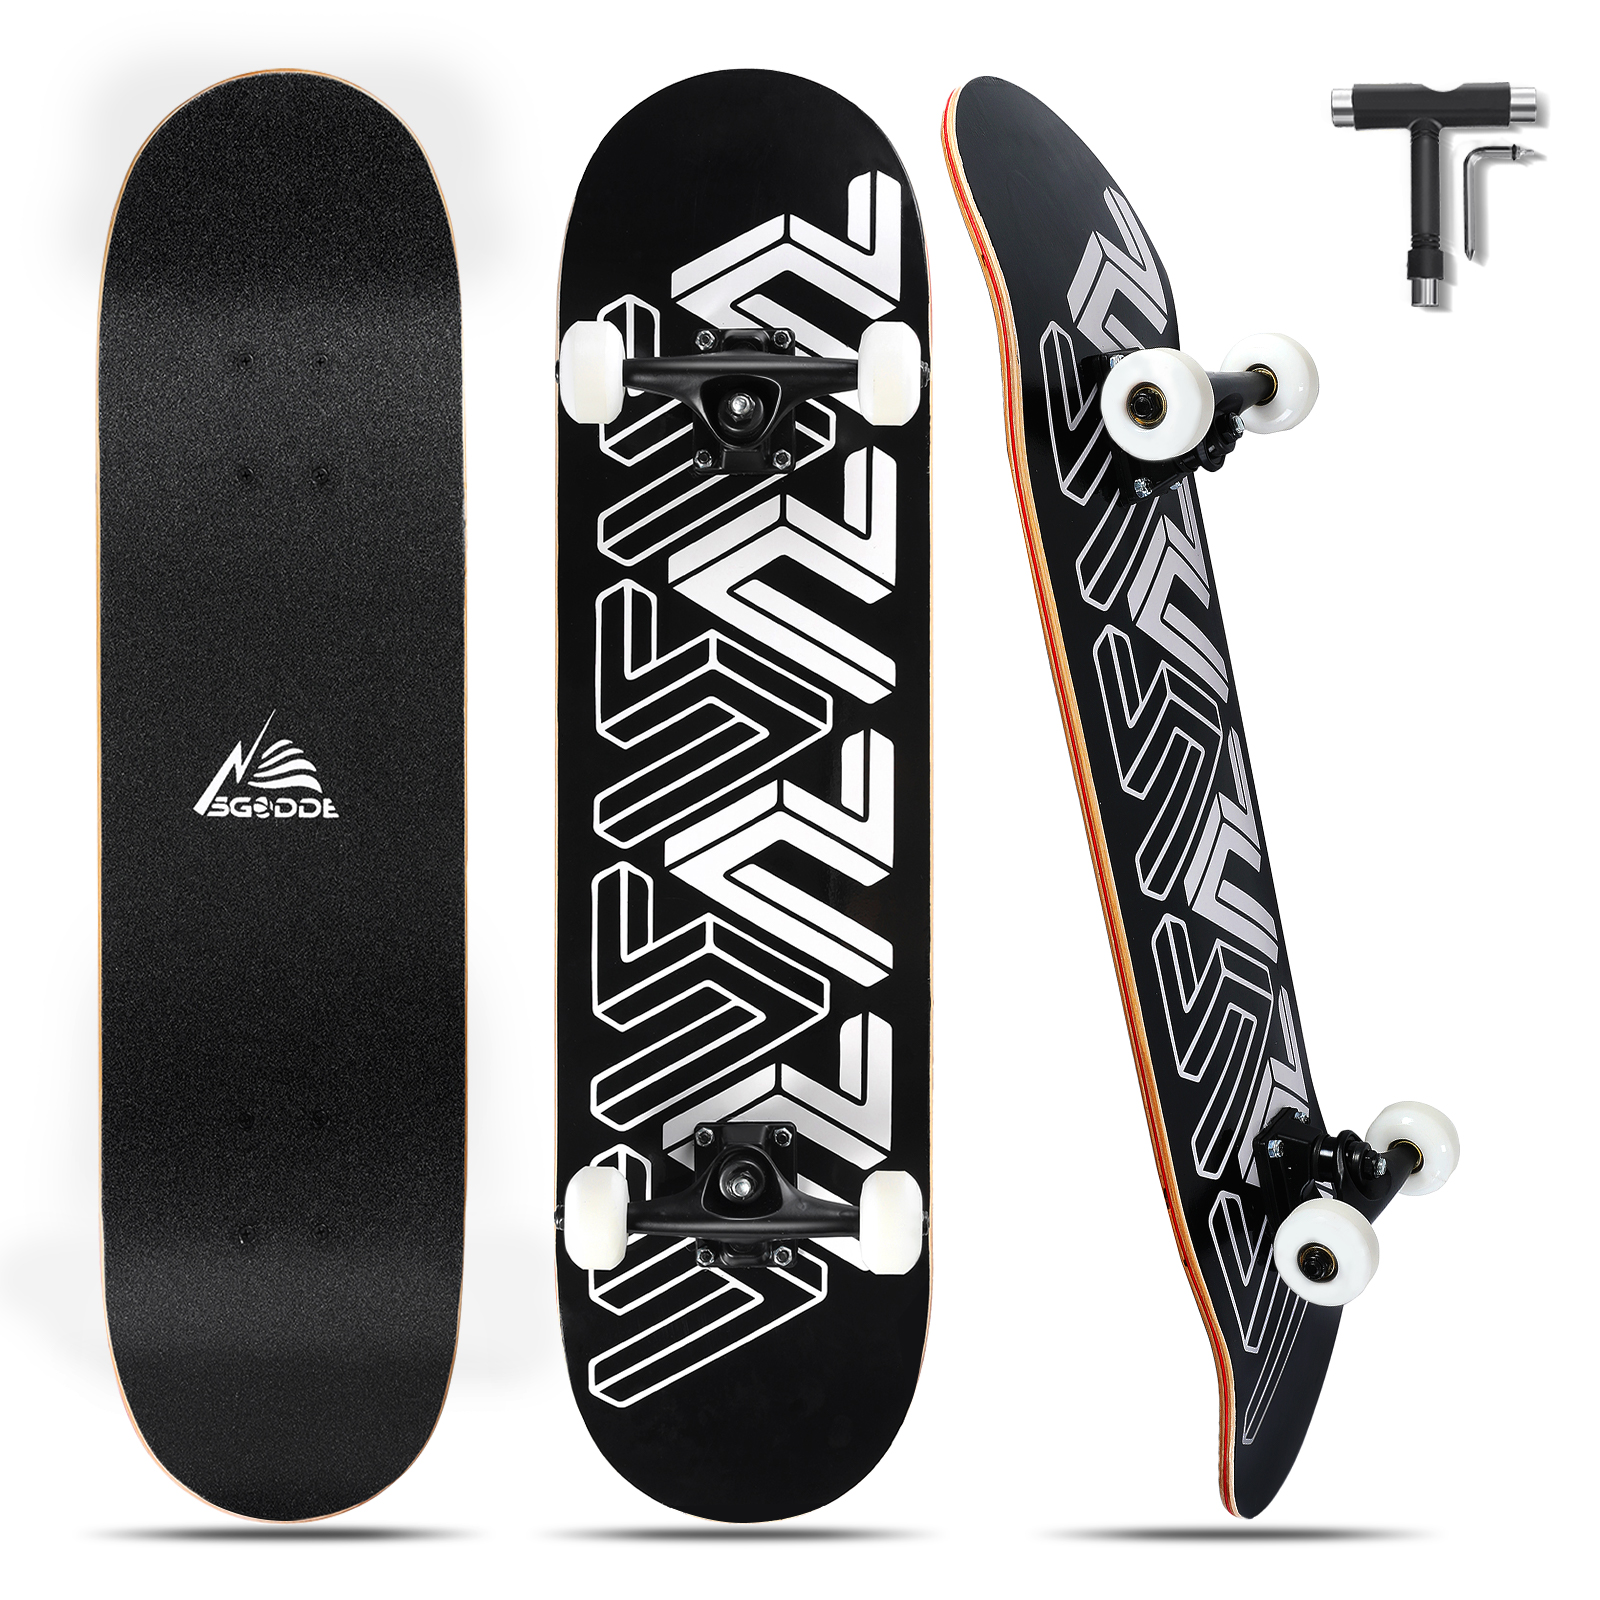 Find 31 Kids Skateboard 7 Layer Maple Long boards for Children Boys Girls Youths Beginners for Sale on Gipsybee.com with cryptocurrencies